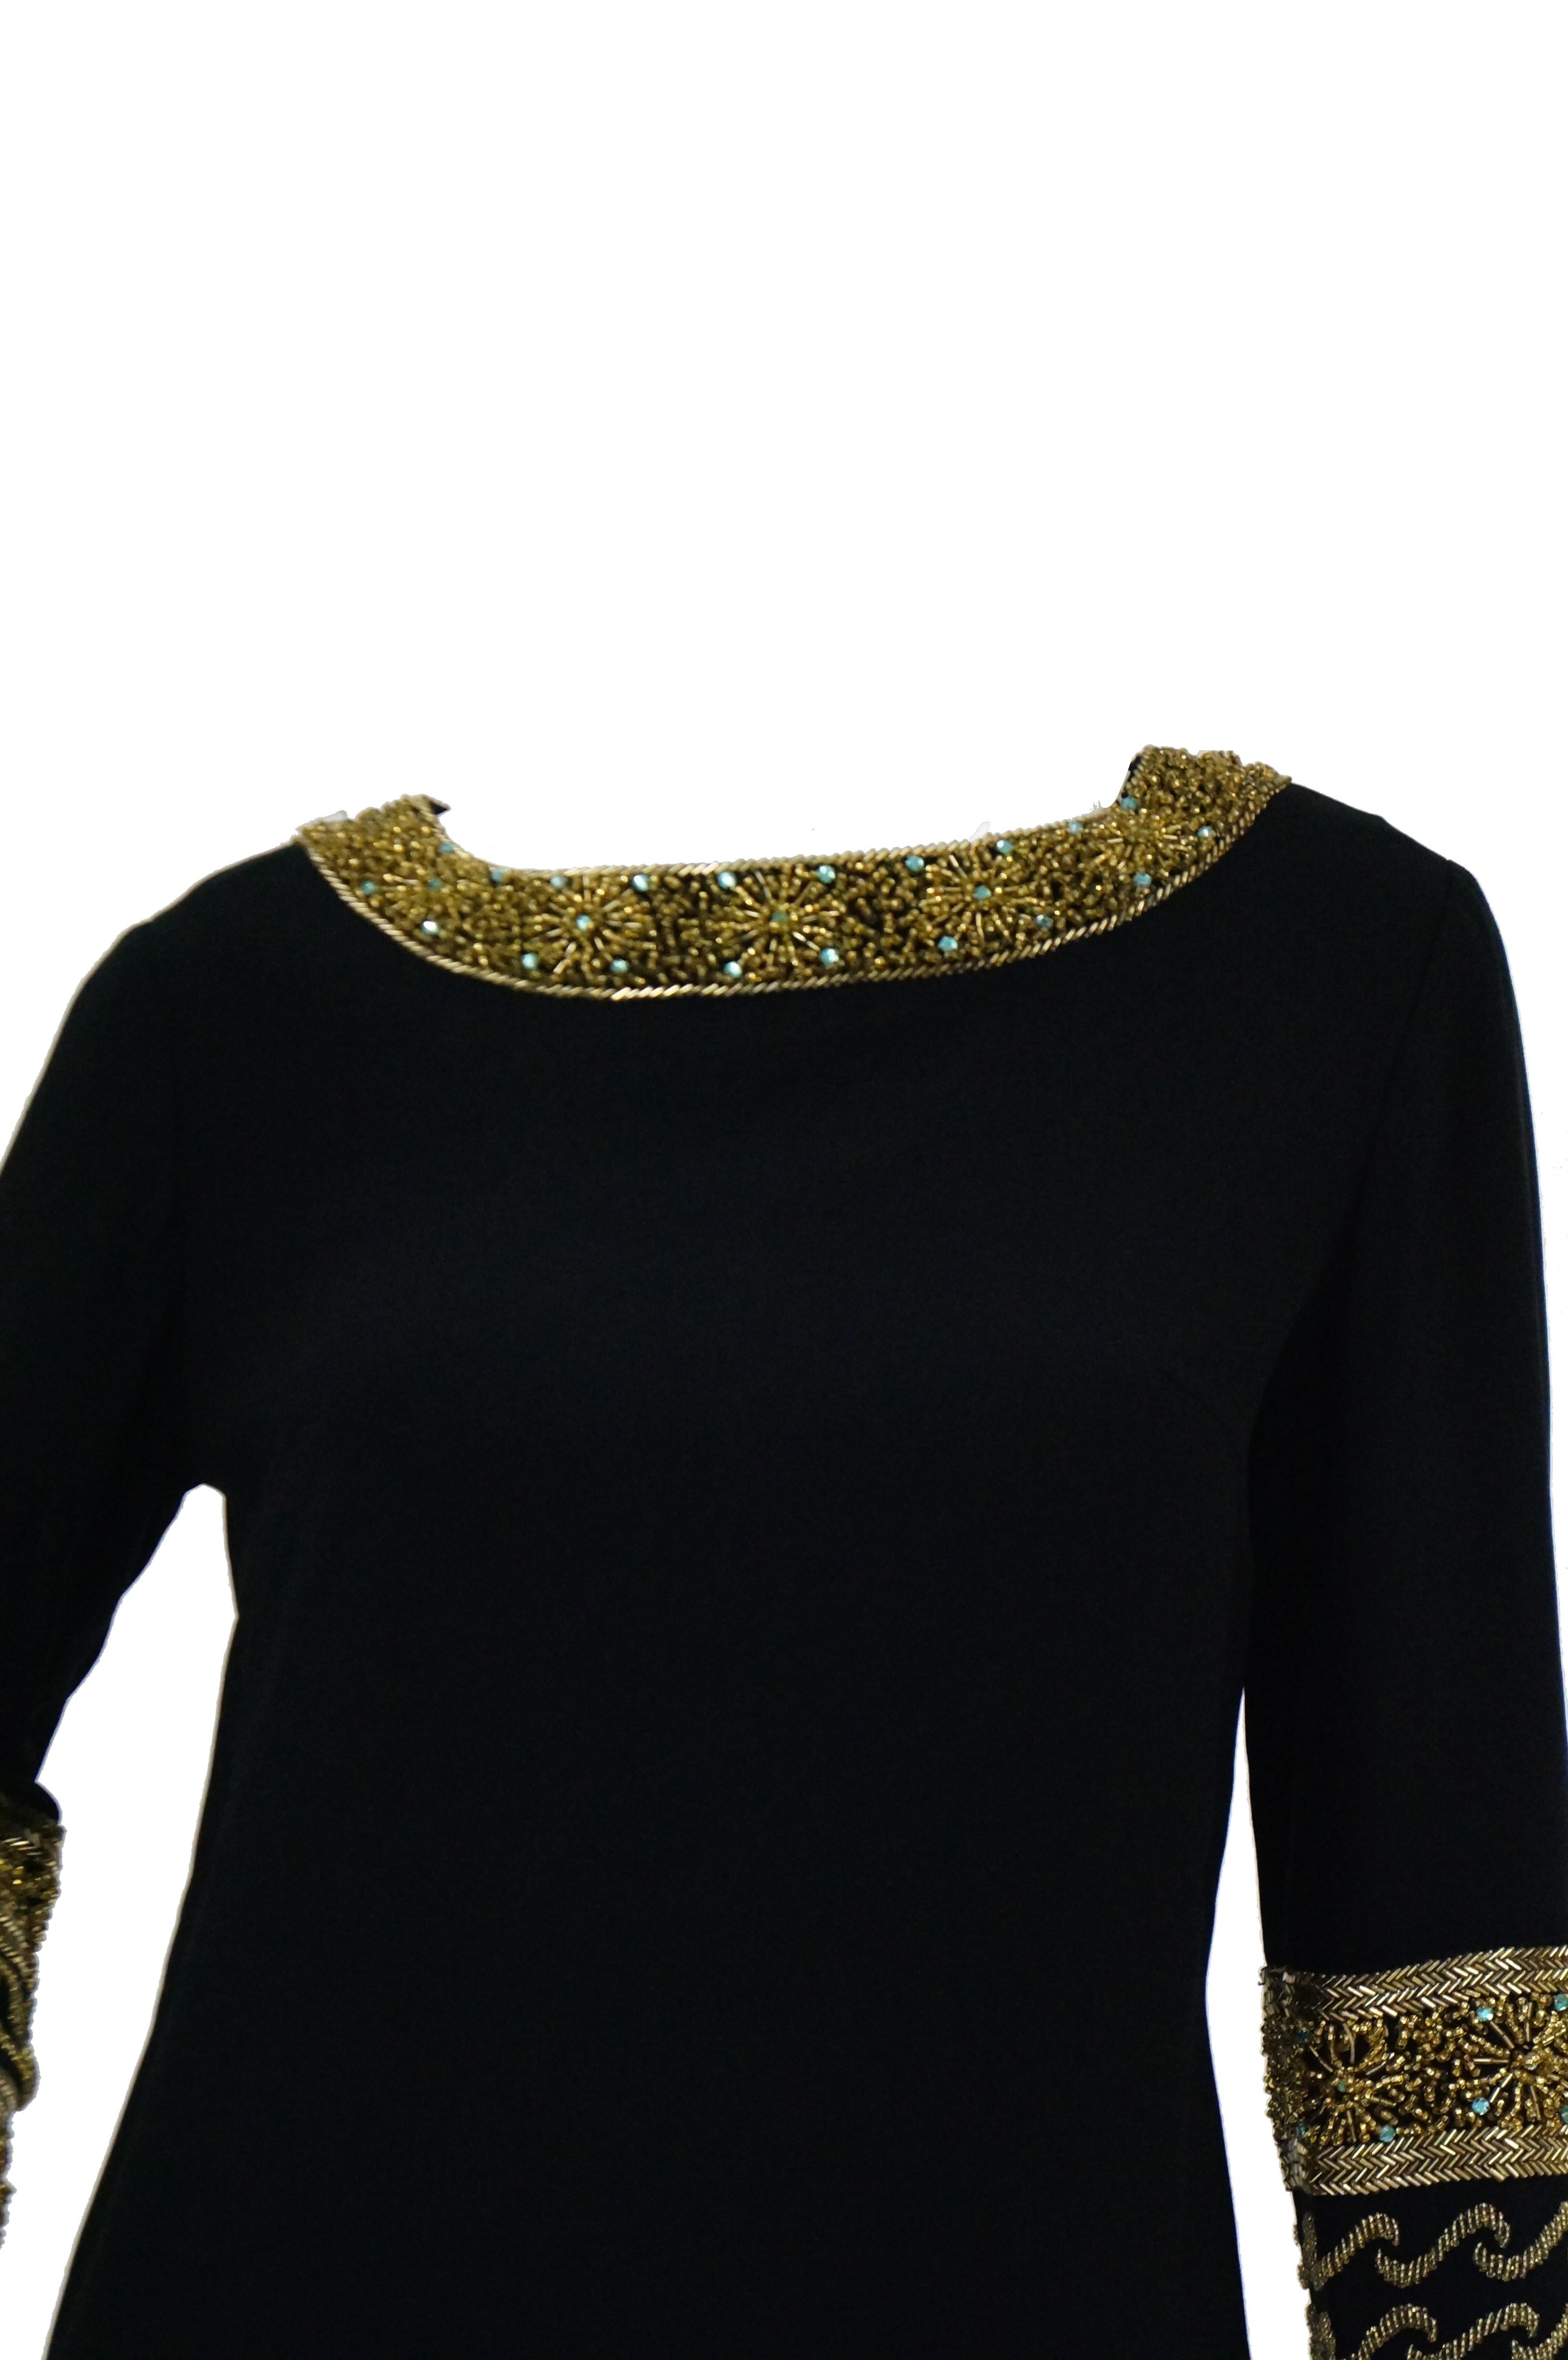 This elegant black silk shift dress features eye - popping neckline and cuff details! This long sleeve dress falls at around the knee and has a wide jewel collar that is absolutely bedecked with gold seed and bugle beads! The beads are arranged in a